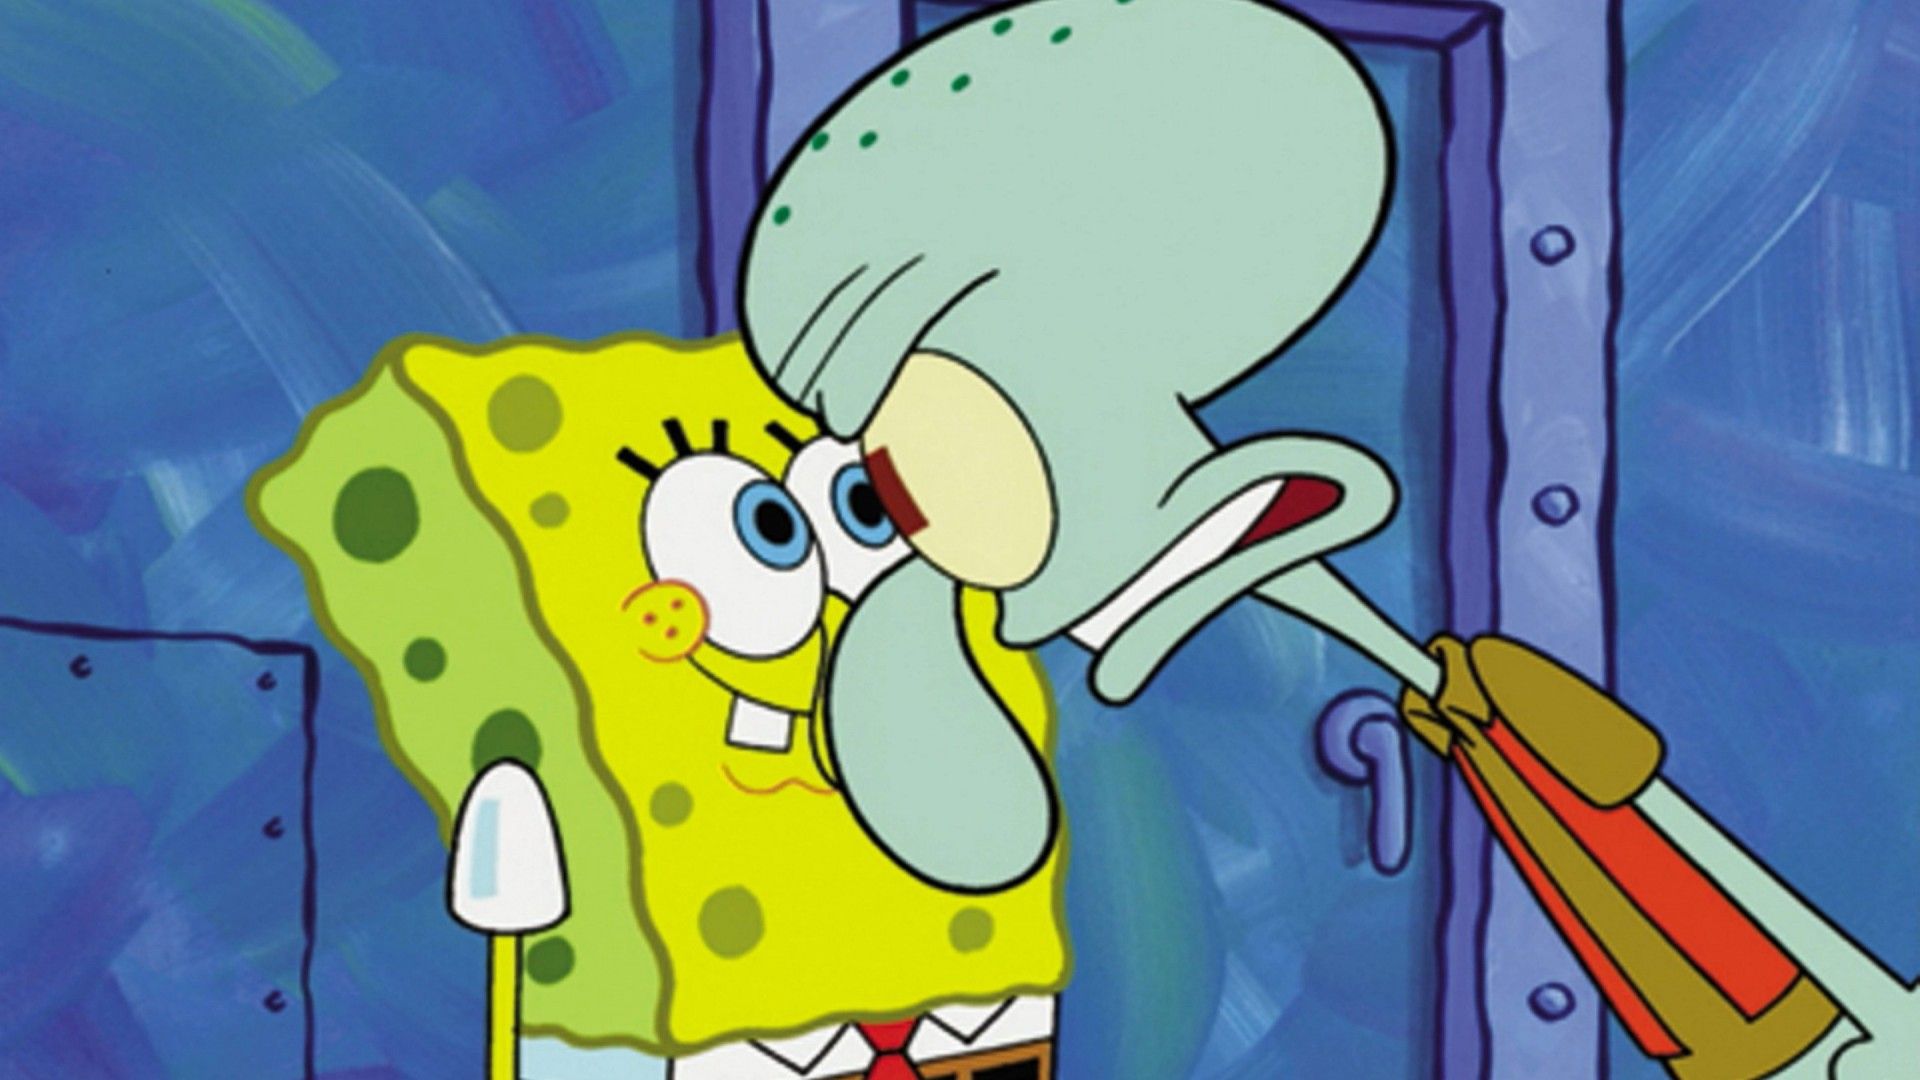 Squidward 4K wallpaper for your desktop or mobile screen free and easy to download